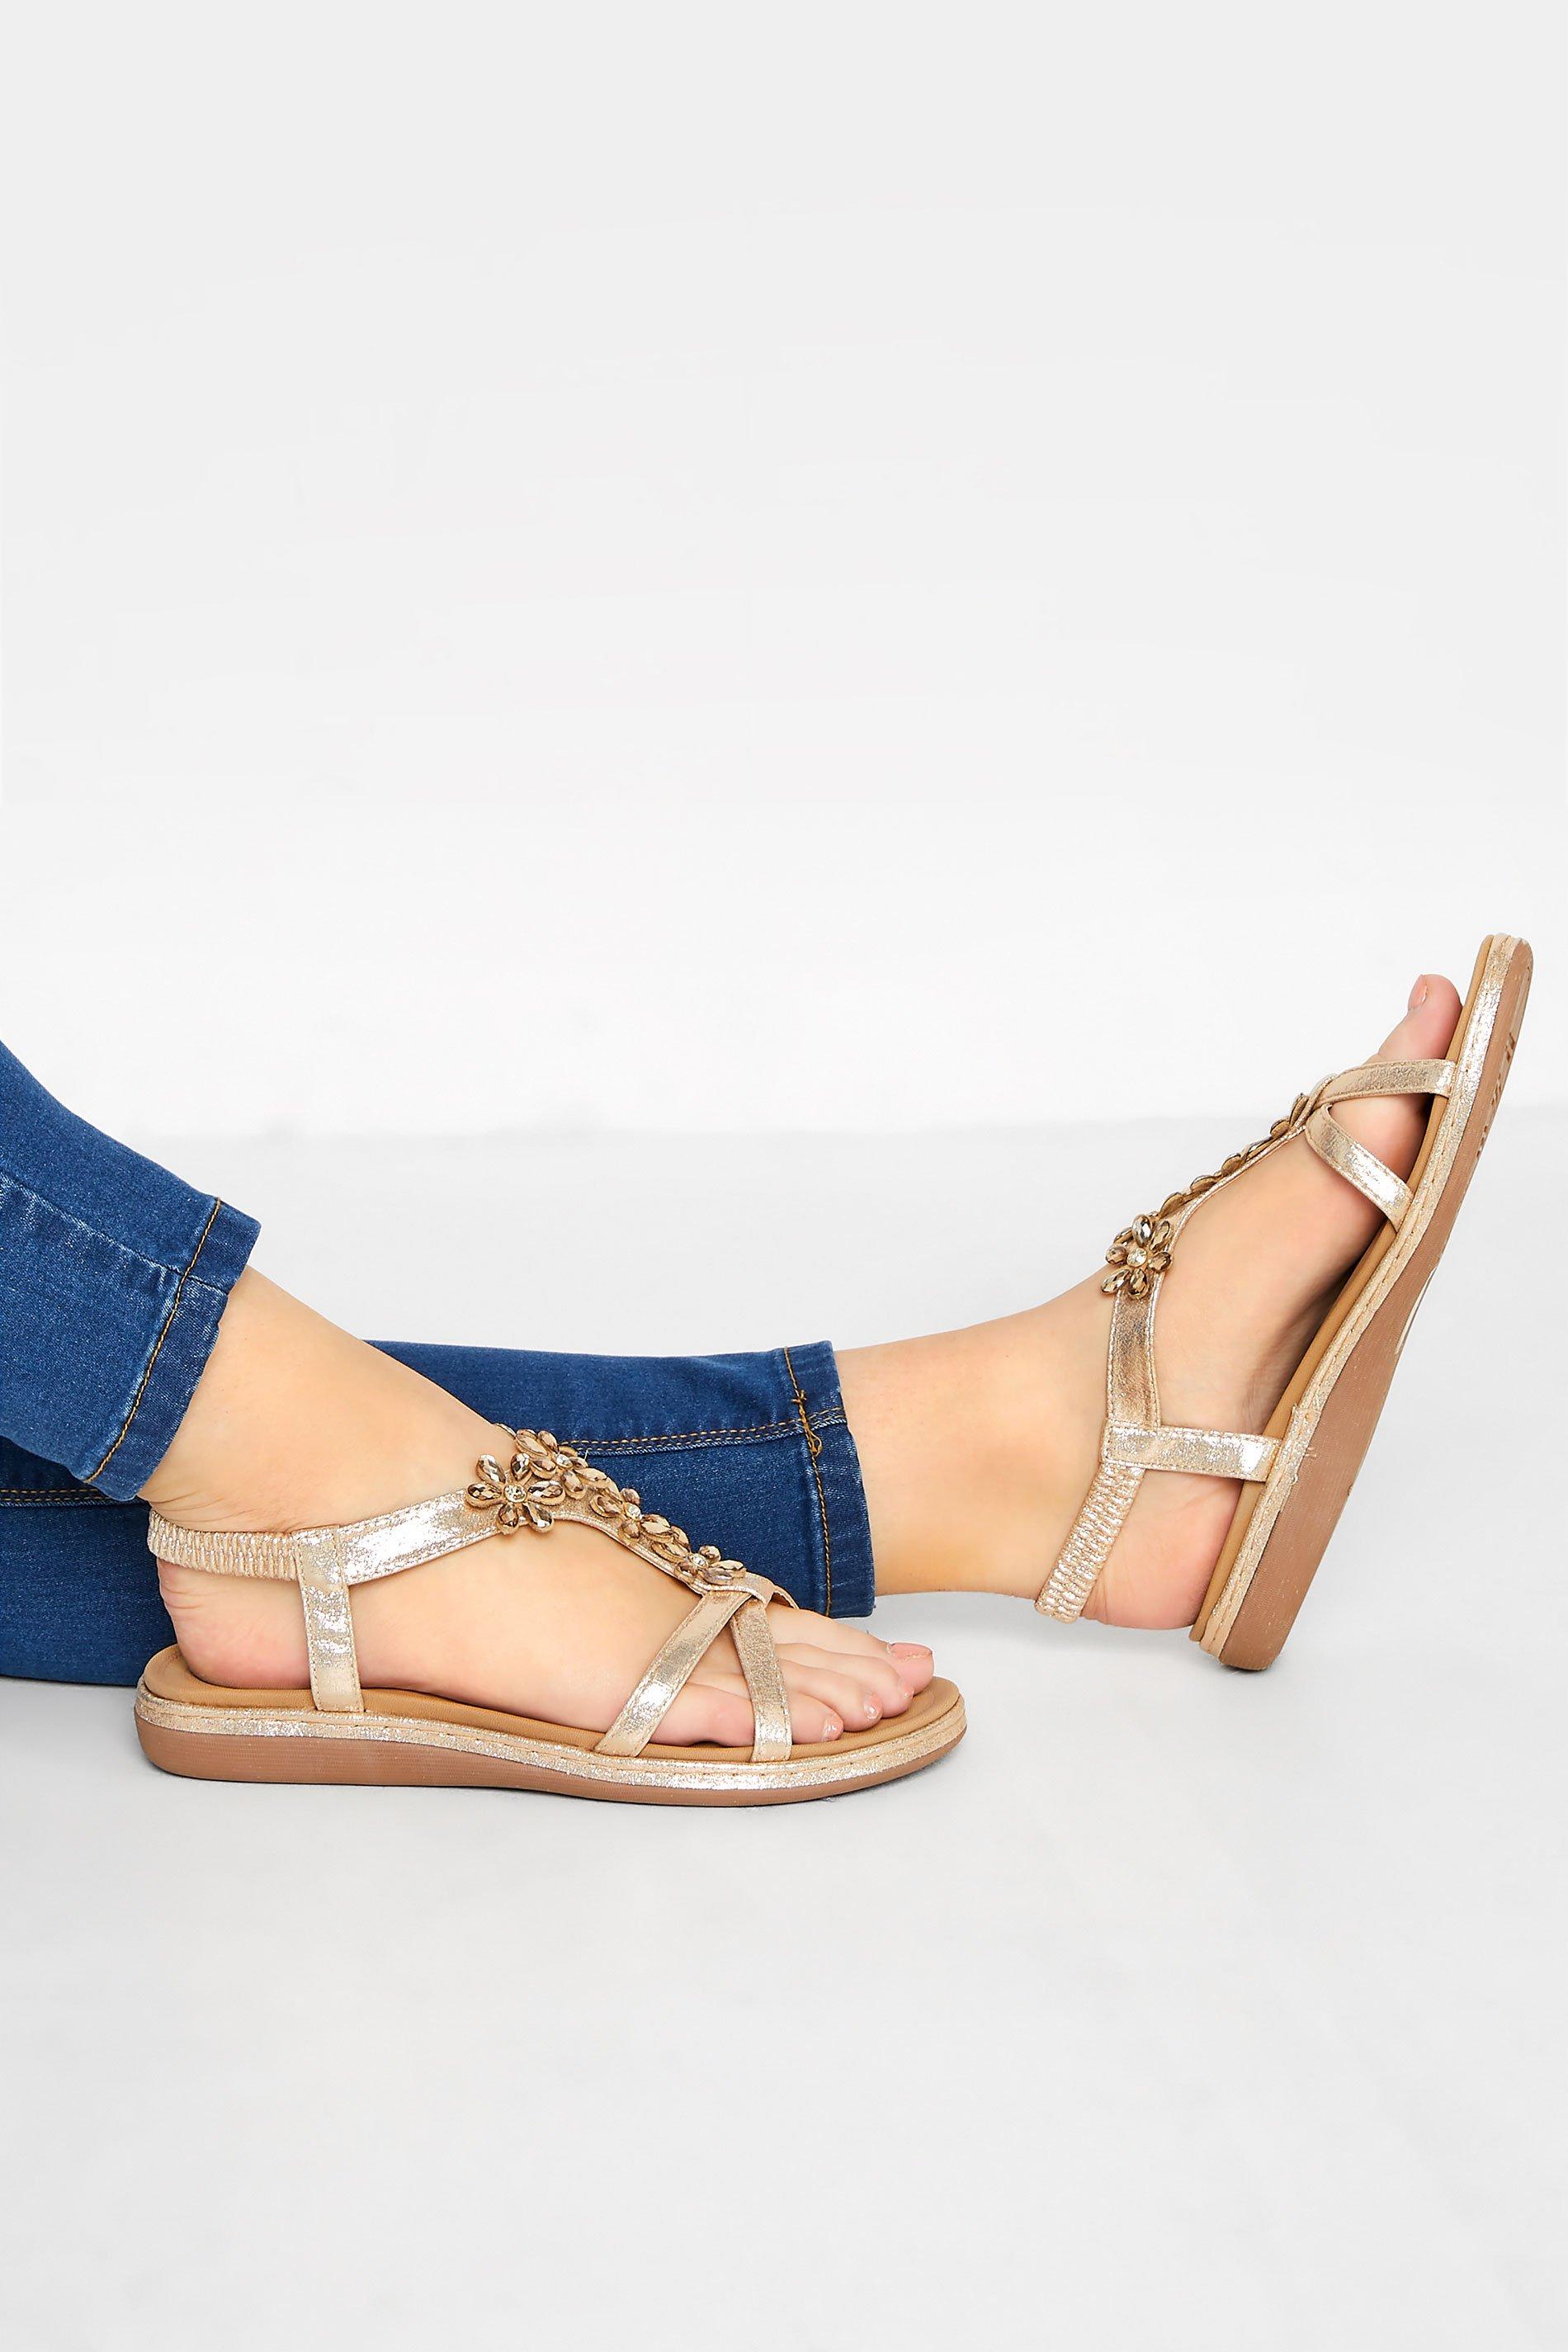 Rose Gold Diamante Flower Sandals In Wide E Fit & Extra Wide Fit